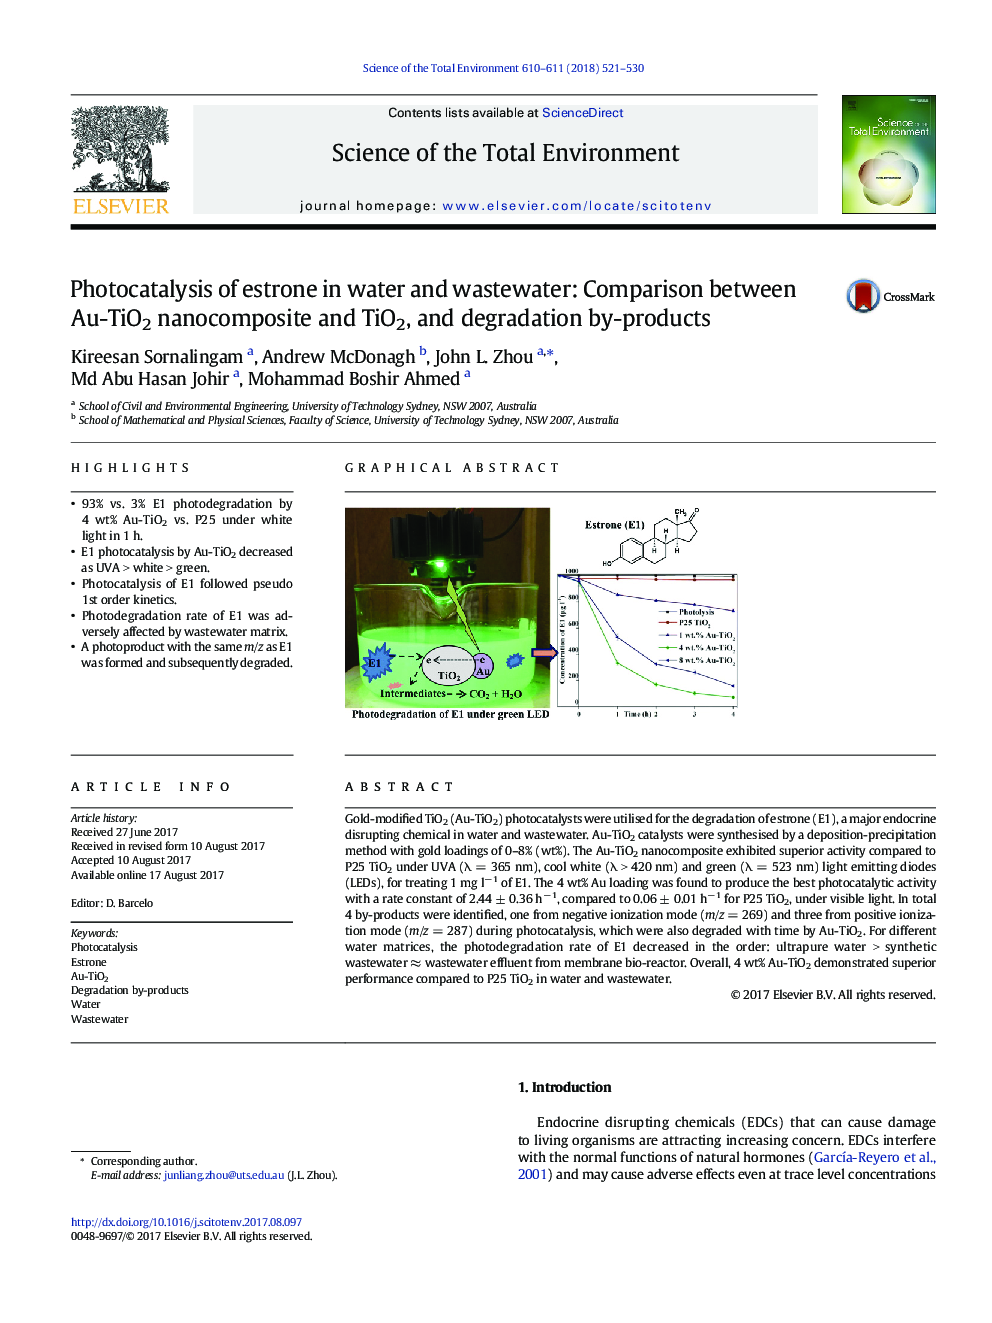 Photocatalysis of estrone in water and wastewater: Comparison between Au-TiO2 nanocomposite and TiO2, and degradation by-products